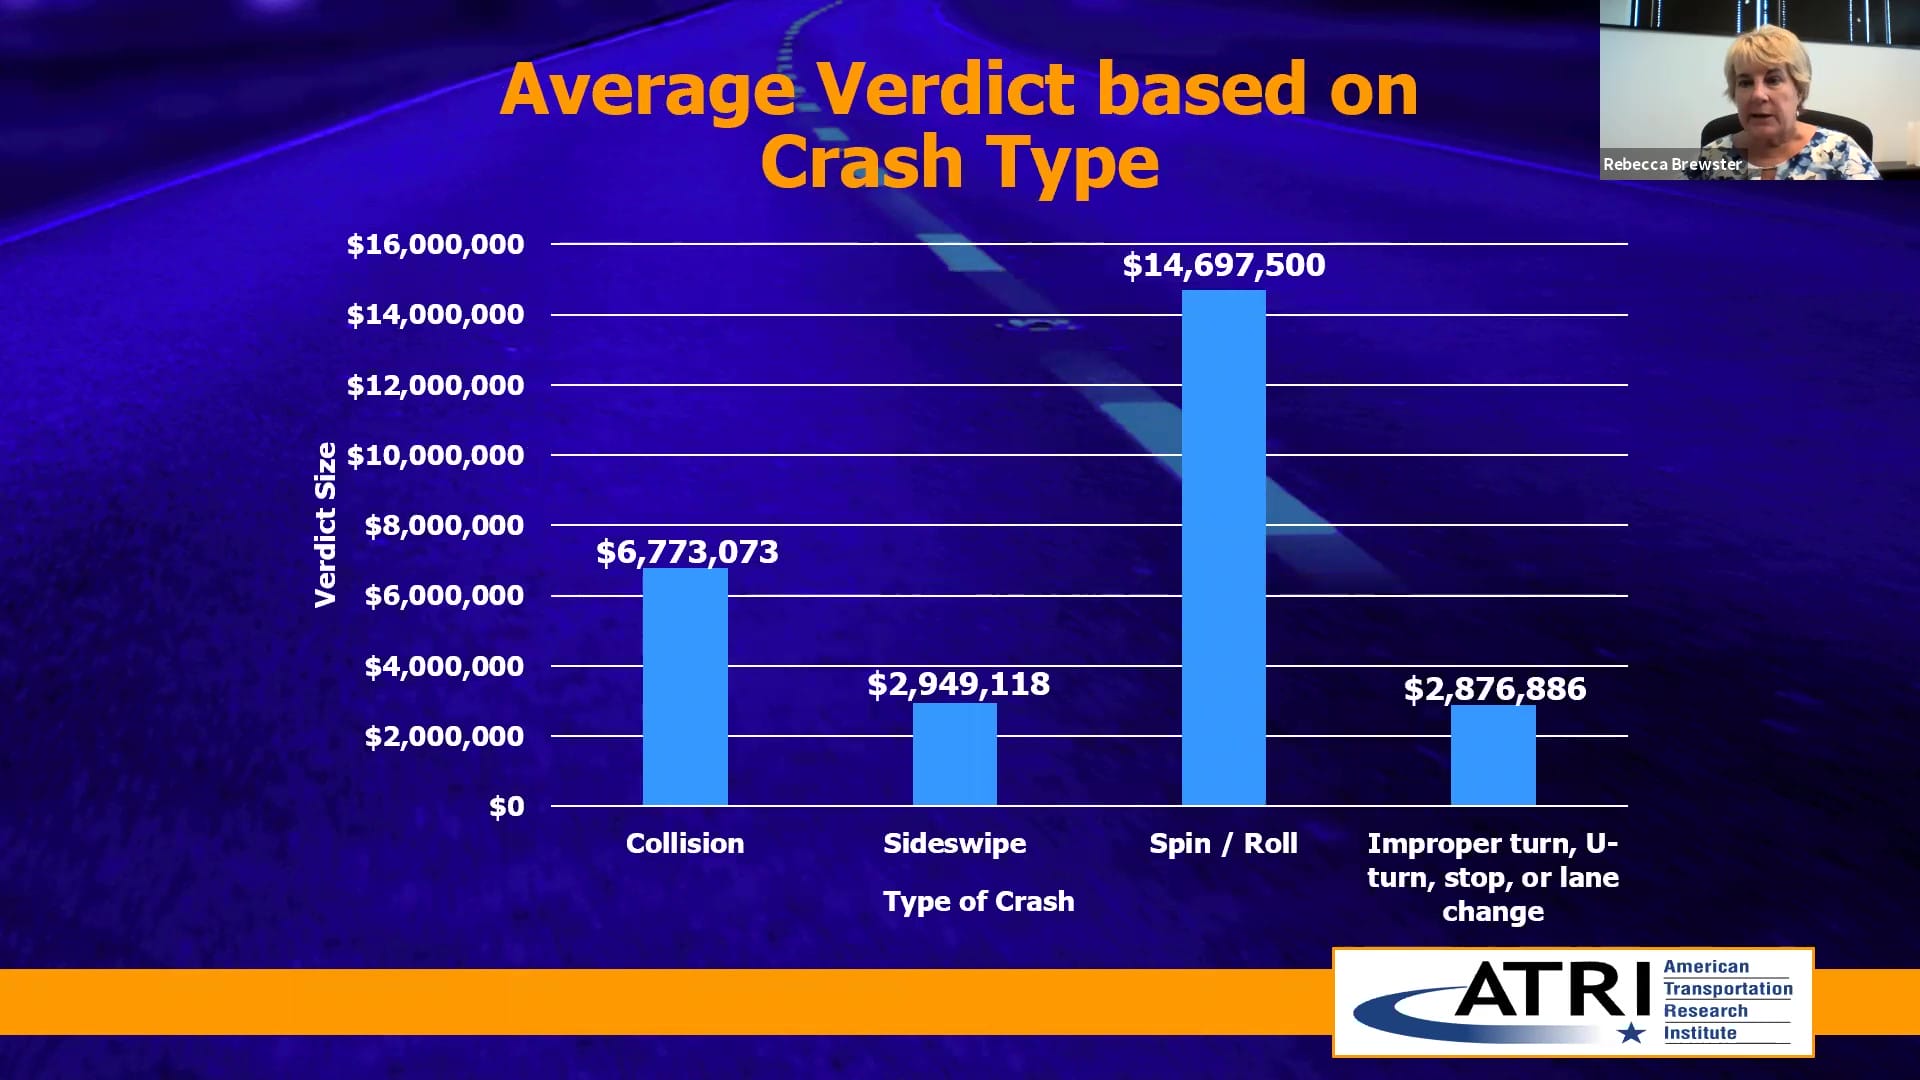 Trucking Industry Concerns 2020 from ATRI Nuclear Verdict Size Crash Type